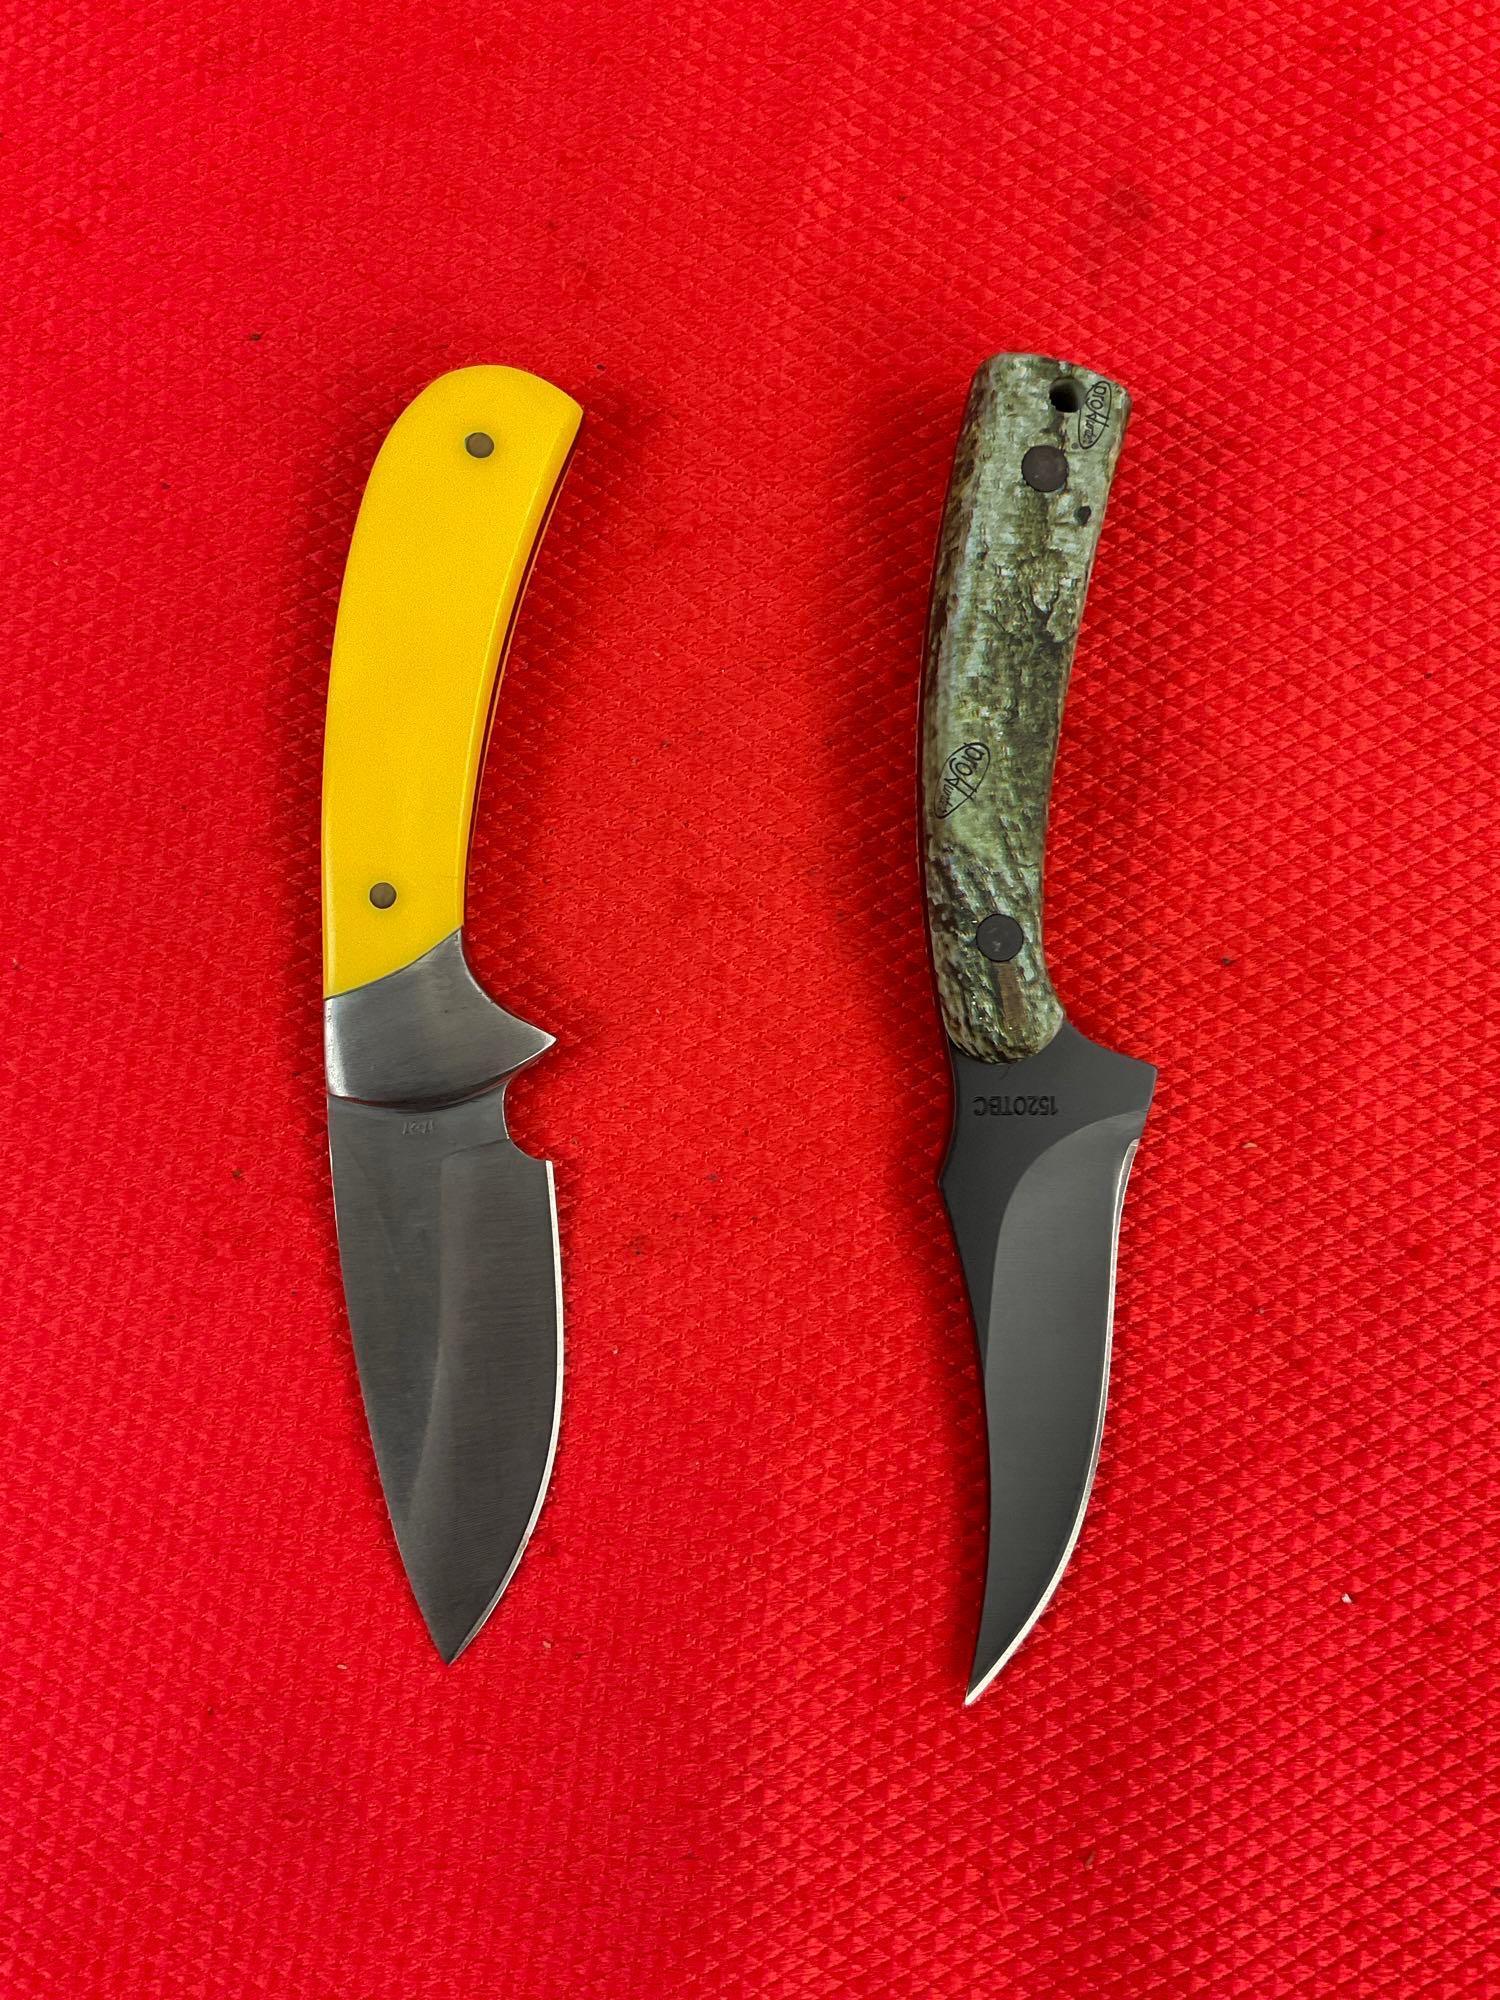 2 pcs Modern Schrade Steel Fixed Blade Hunting Knives Models 17-27 & 152OTBC w/ Sheathes. See pics.